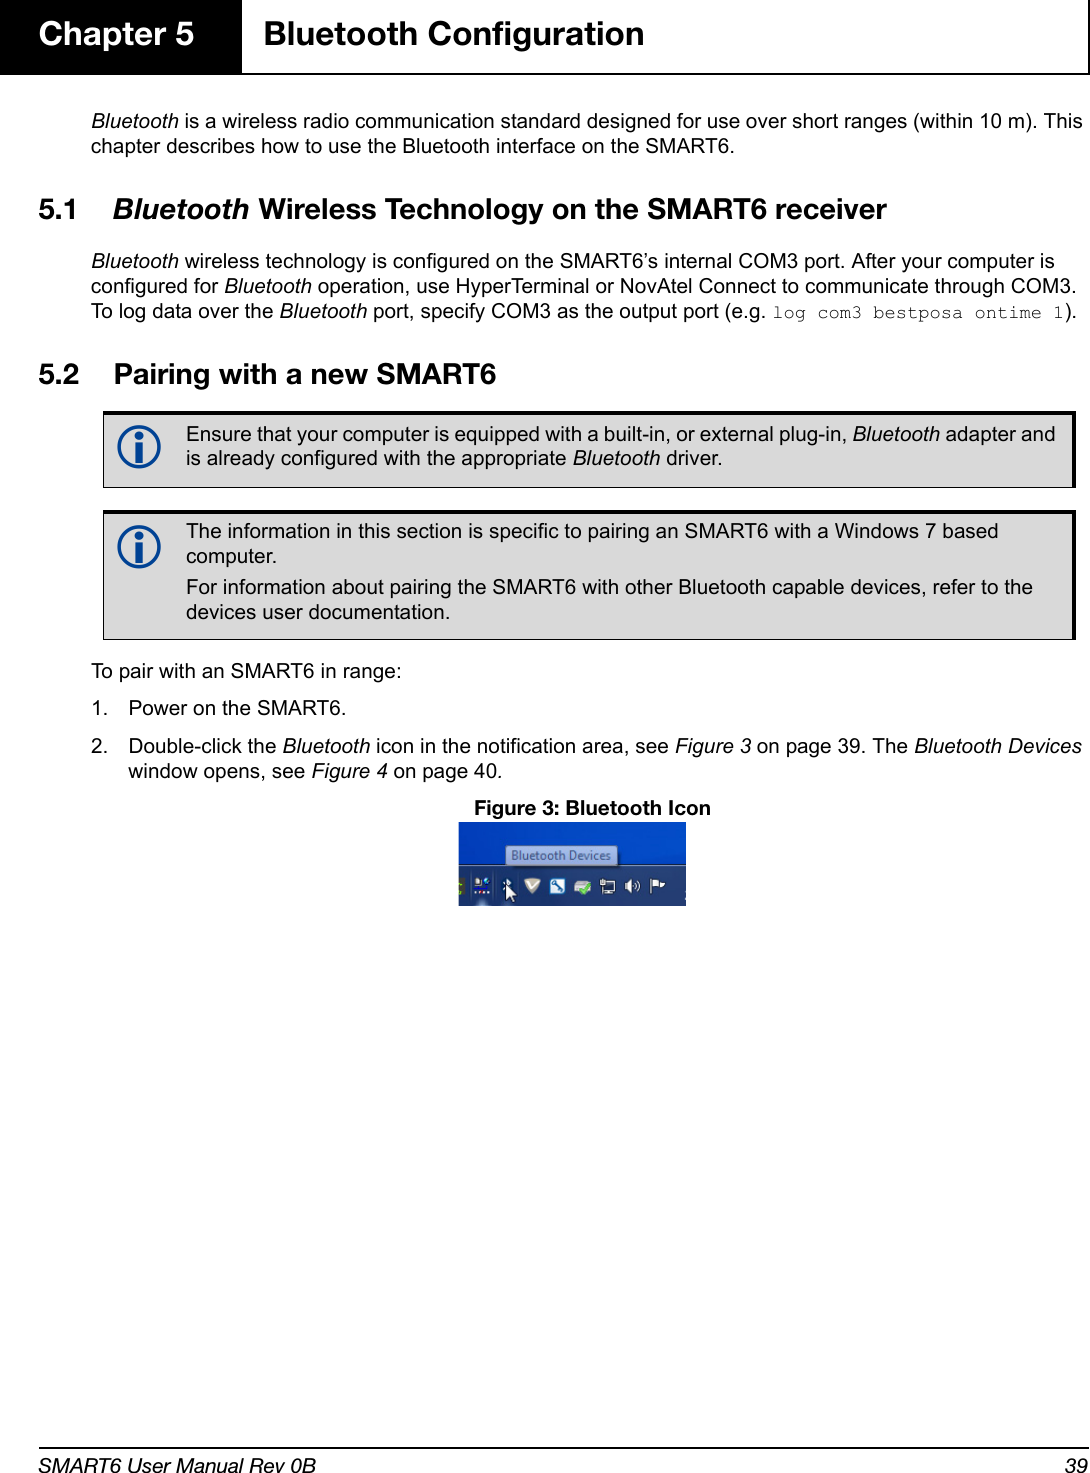 SMART6 User Manual Rev 0B 39Chapter 5 Bluetooth ConfigurationBluetooth is a wireless radio communication standard designed for use over short ranges (within 10 m). This chapter describes how to use the Bluetooth interface on the SMART6.5.1 Bluetooth Wireless Technology on the SMART6 receiverBluetooth wireless technology is configured on the SMART6’s internal COM3 port. After your computer is configured for Bluetooth operation, use HyperTerminal or NovAtel Connect to communicate through COM3. To log data over the Bluetooth port, specify COM3 as the output port (e.g. log com3 bestposa ontime 1).5.2 Pairing with a new SMART6To pair with an SMART6 in range:1. Power on the SMART6.2. Double-click the Bluetooth icon in the notification area, see Figure 3 on page 39. The Bluetooth Devices window opens, see Figure 4 on page 40. Figure 3: Bluetooth IconEnsure that your computer is equipped with a built-in, or external plug-in, Bluetooth adapter and is already configured with the appropriate Bluetooth driver.The information in this section is specific to pairing an SMART6 with a Windows 7 based computer. For information about pairing the SMART6 with other Bluetooth capable devices, refer to the devices user documentation.